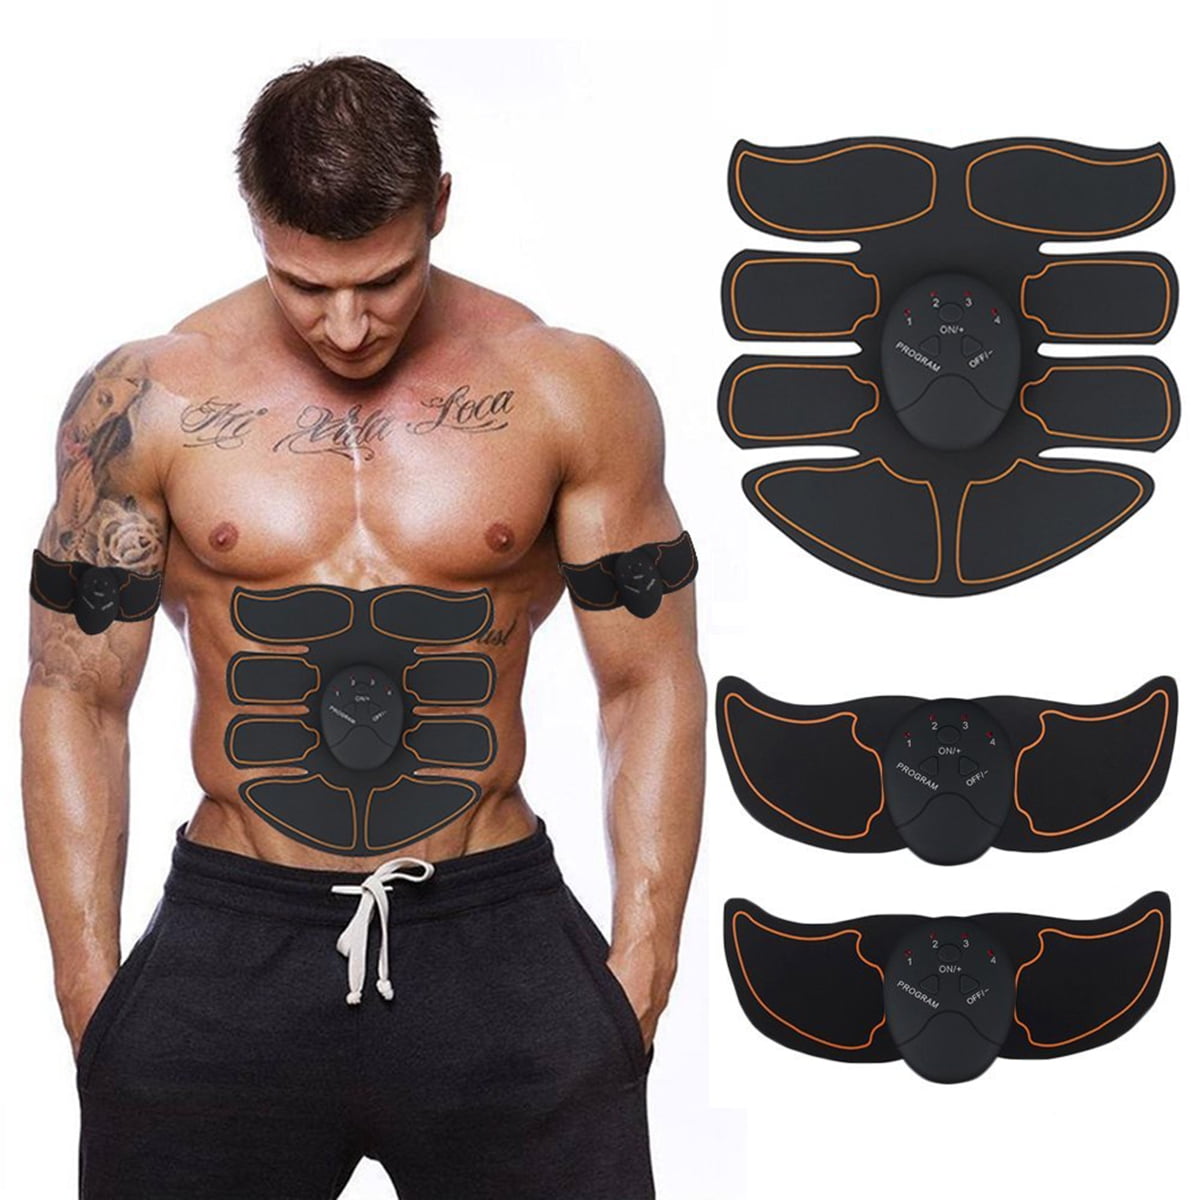 Men Abs Stimulator Ab Stimulator Abs Stimulator Muscle Belly Sculpting Cream 